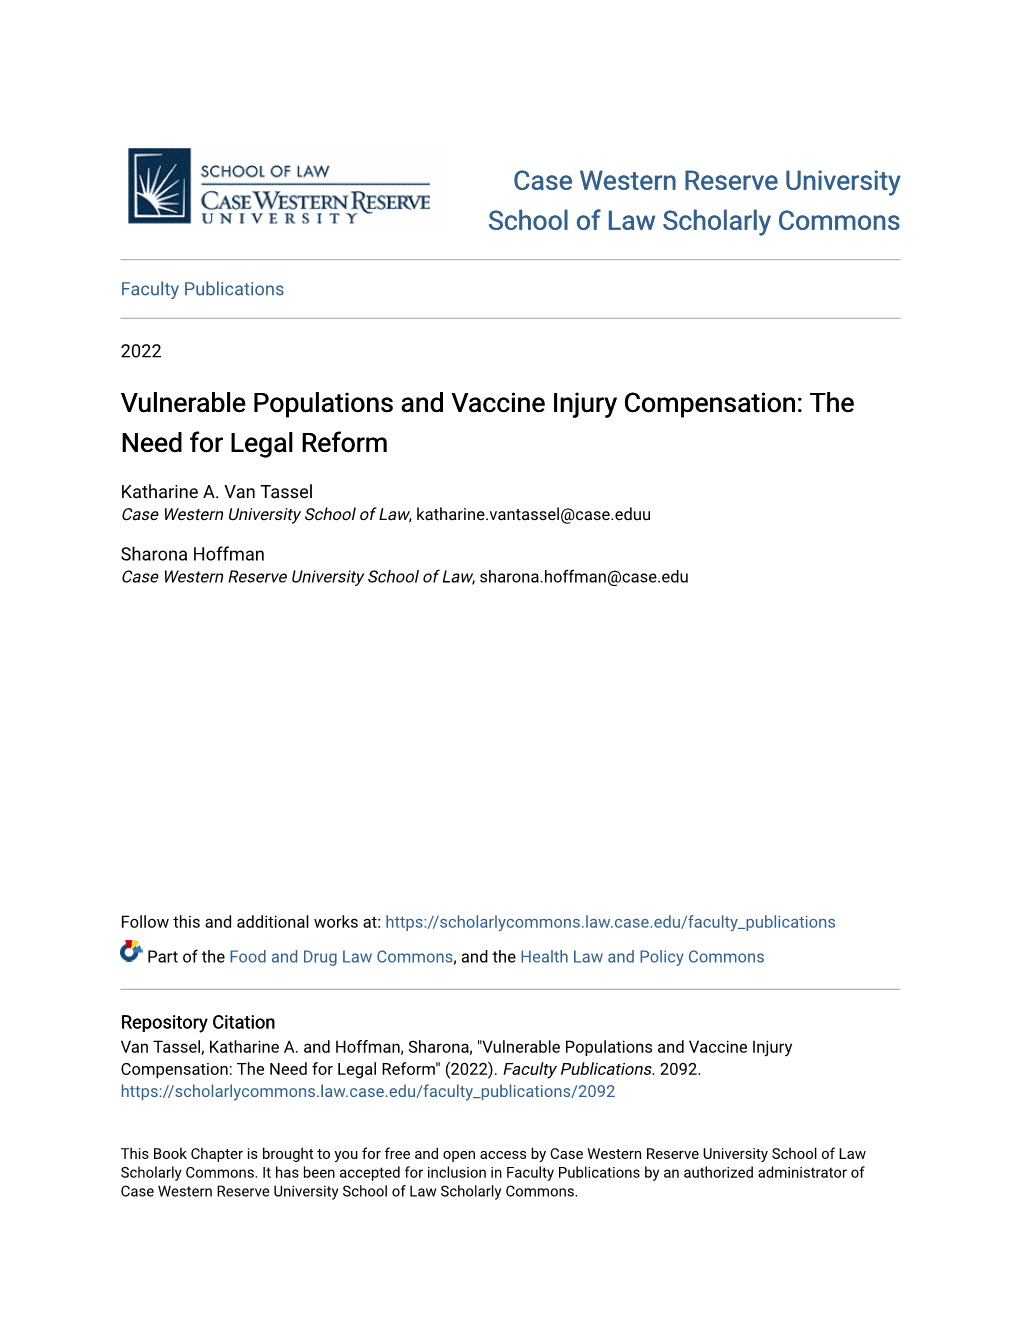 Vulnerable Populations and Vaccine Injury Compensation: the Need for Legal Reform